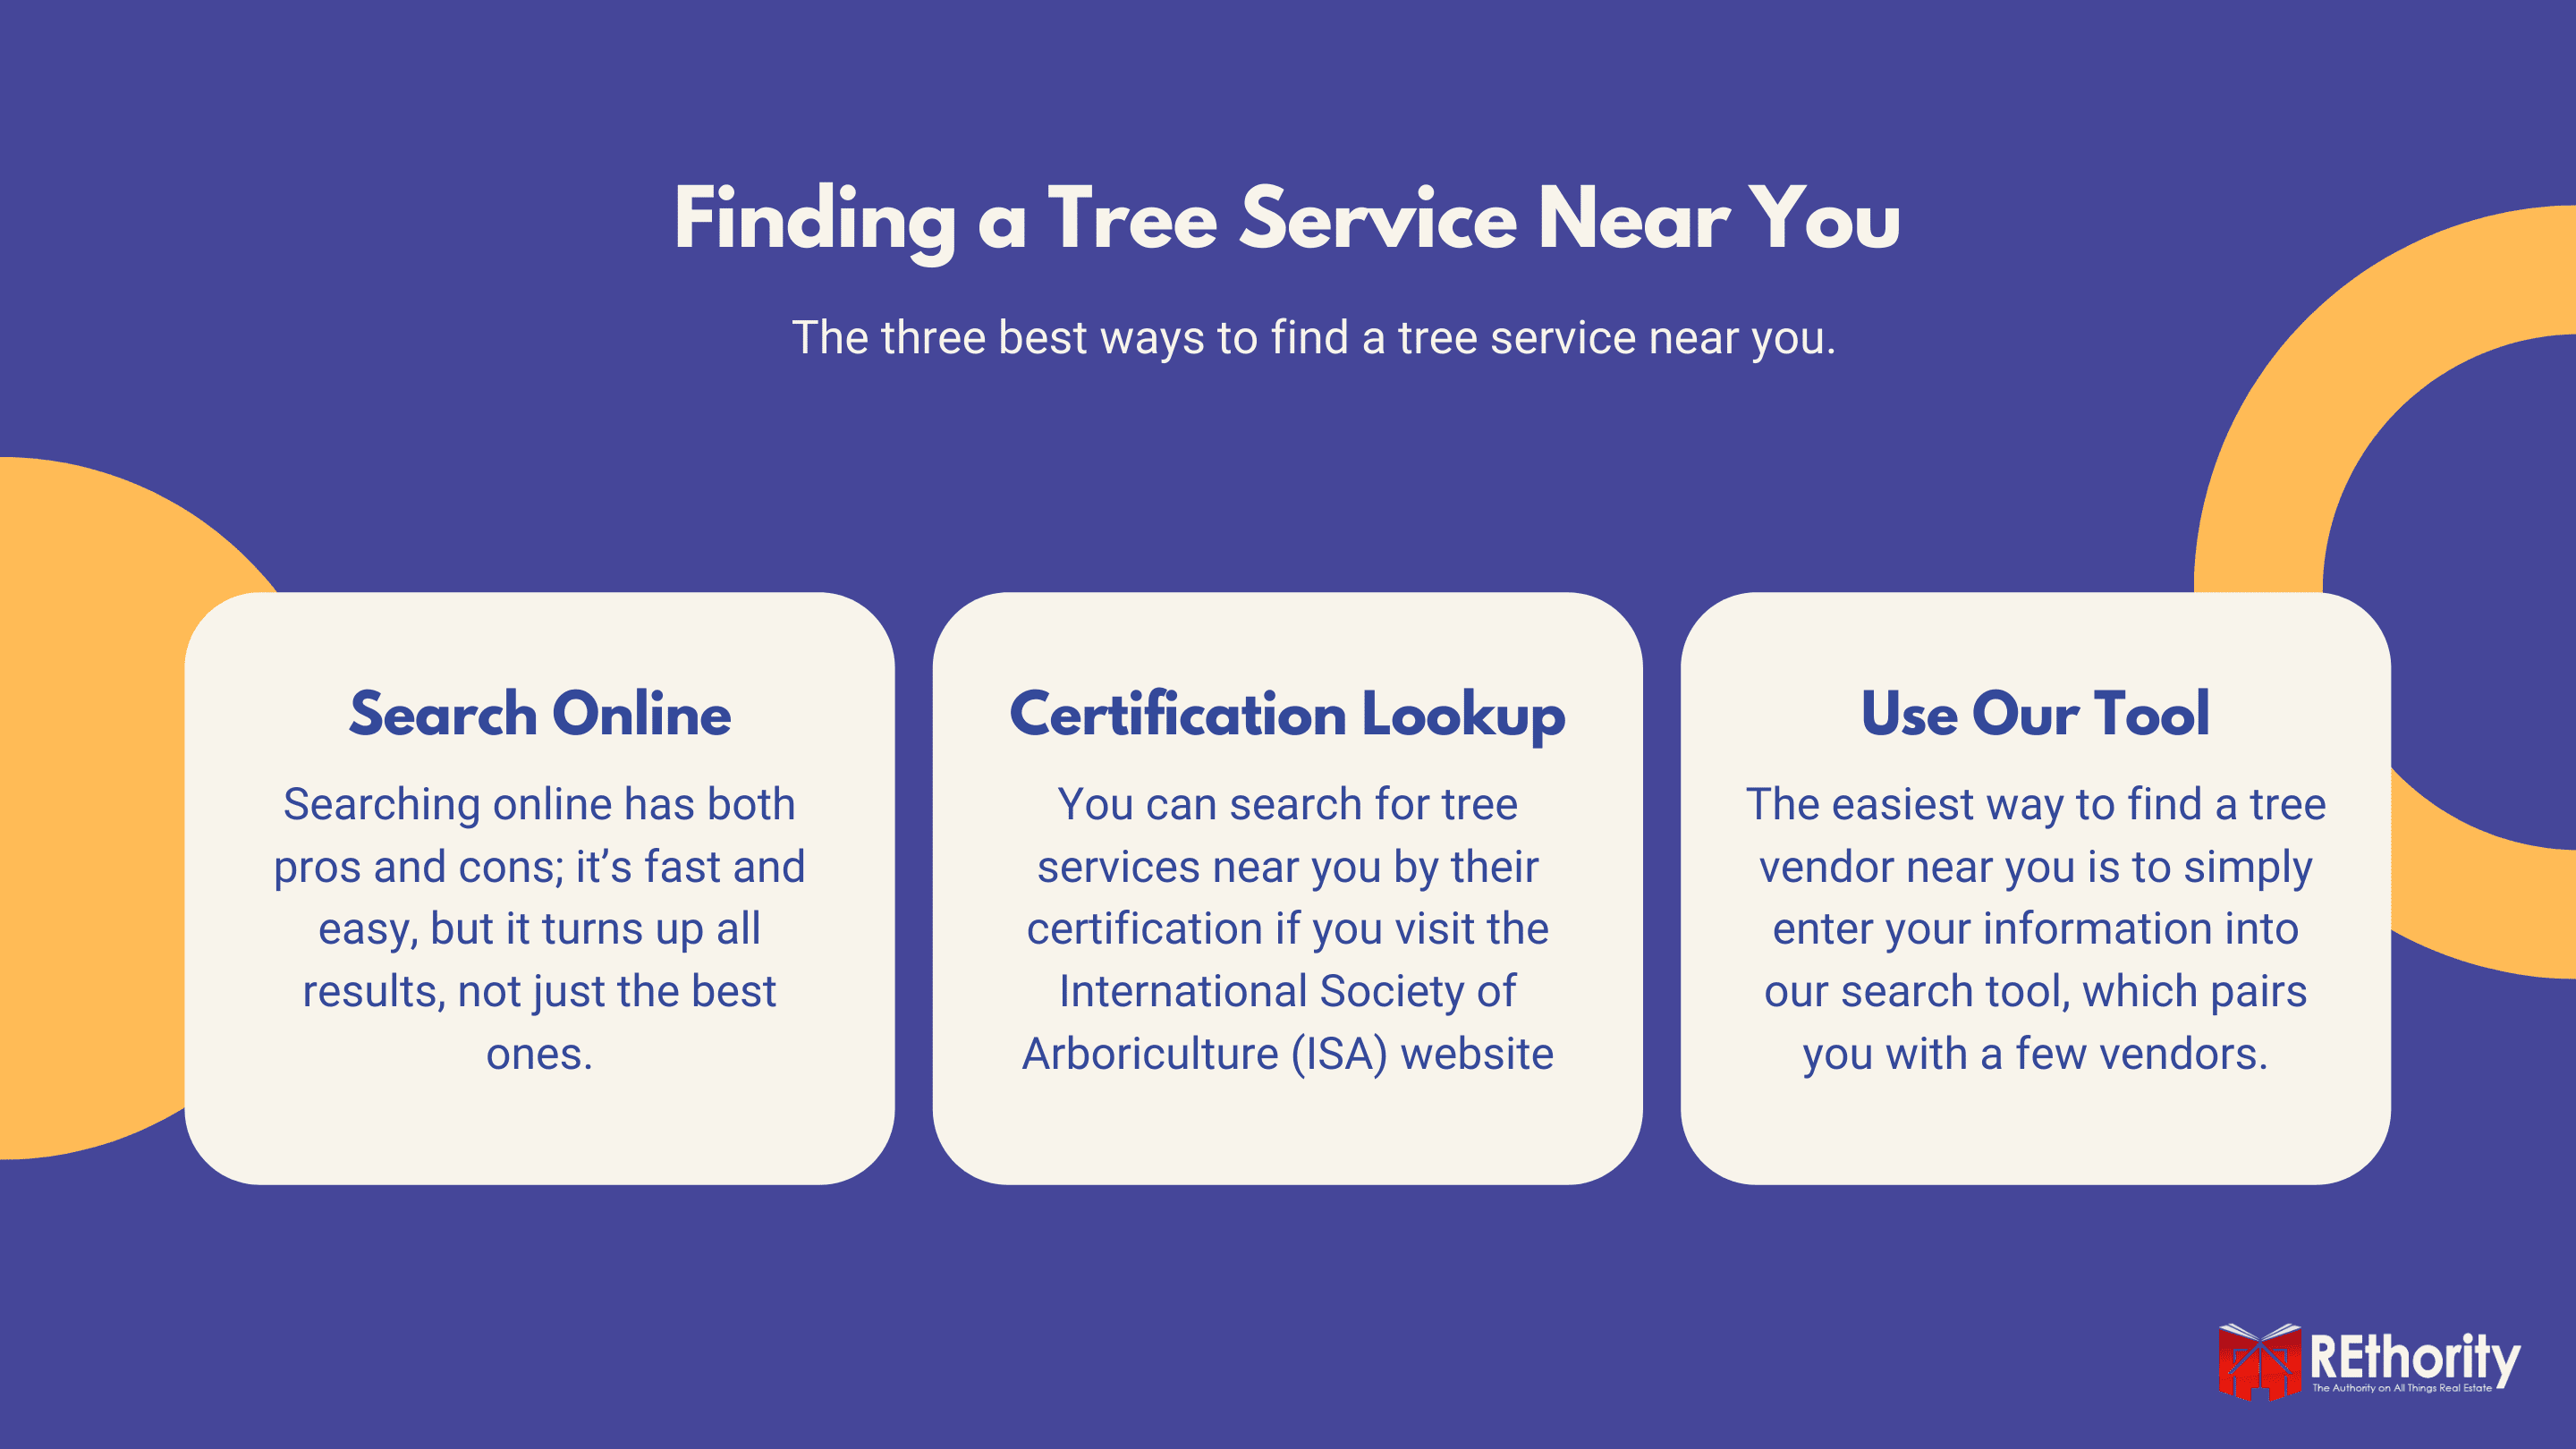 Finding a Tree Service Near You graphic explaining the three best ways to find a vendor near you